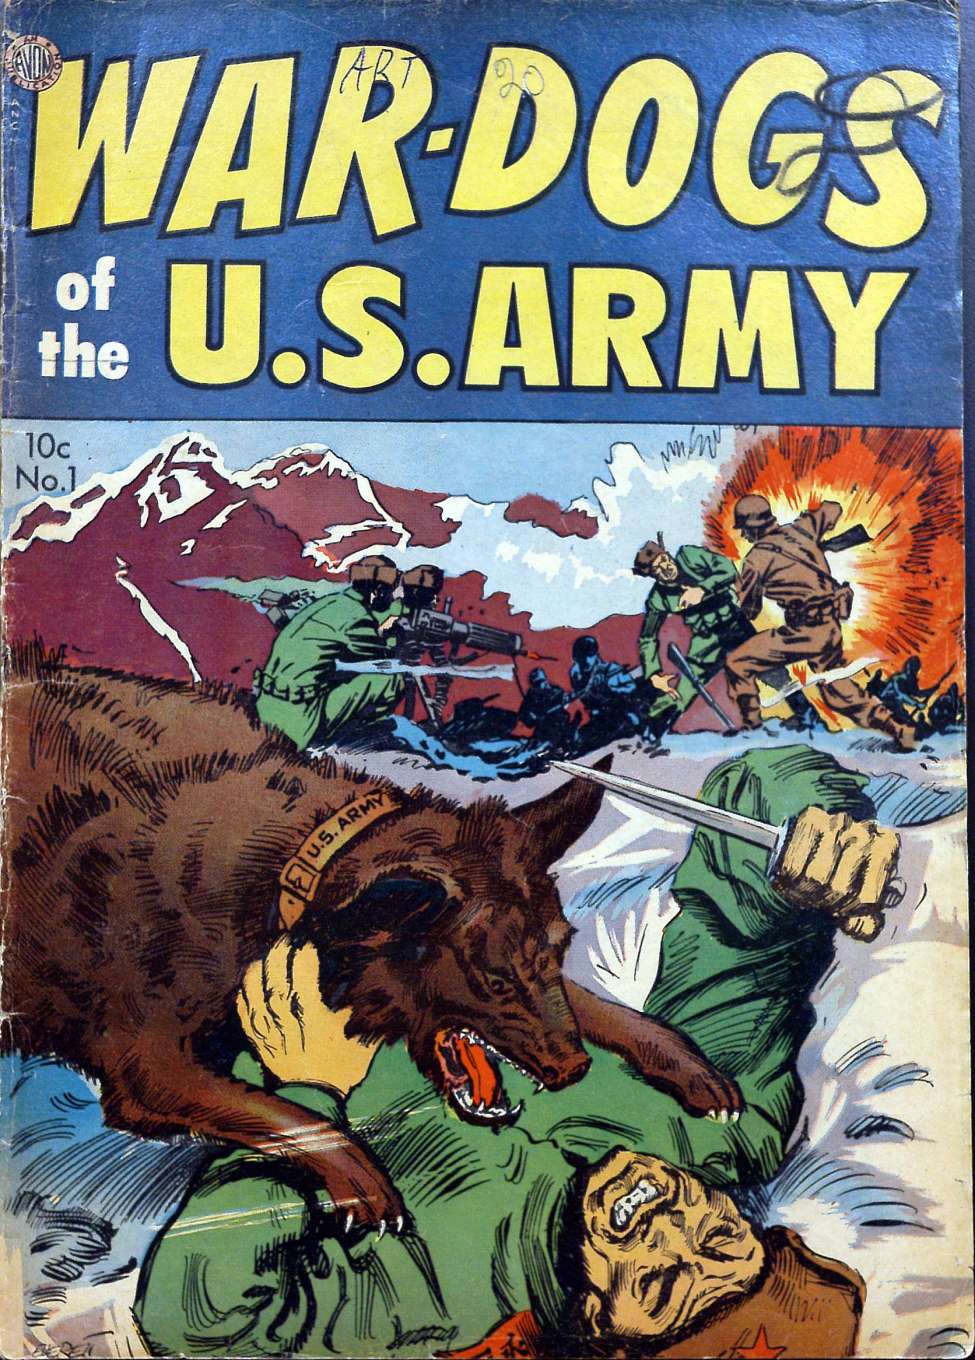 Book Cover For War Dogs of the U.S. Army 1